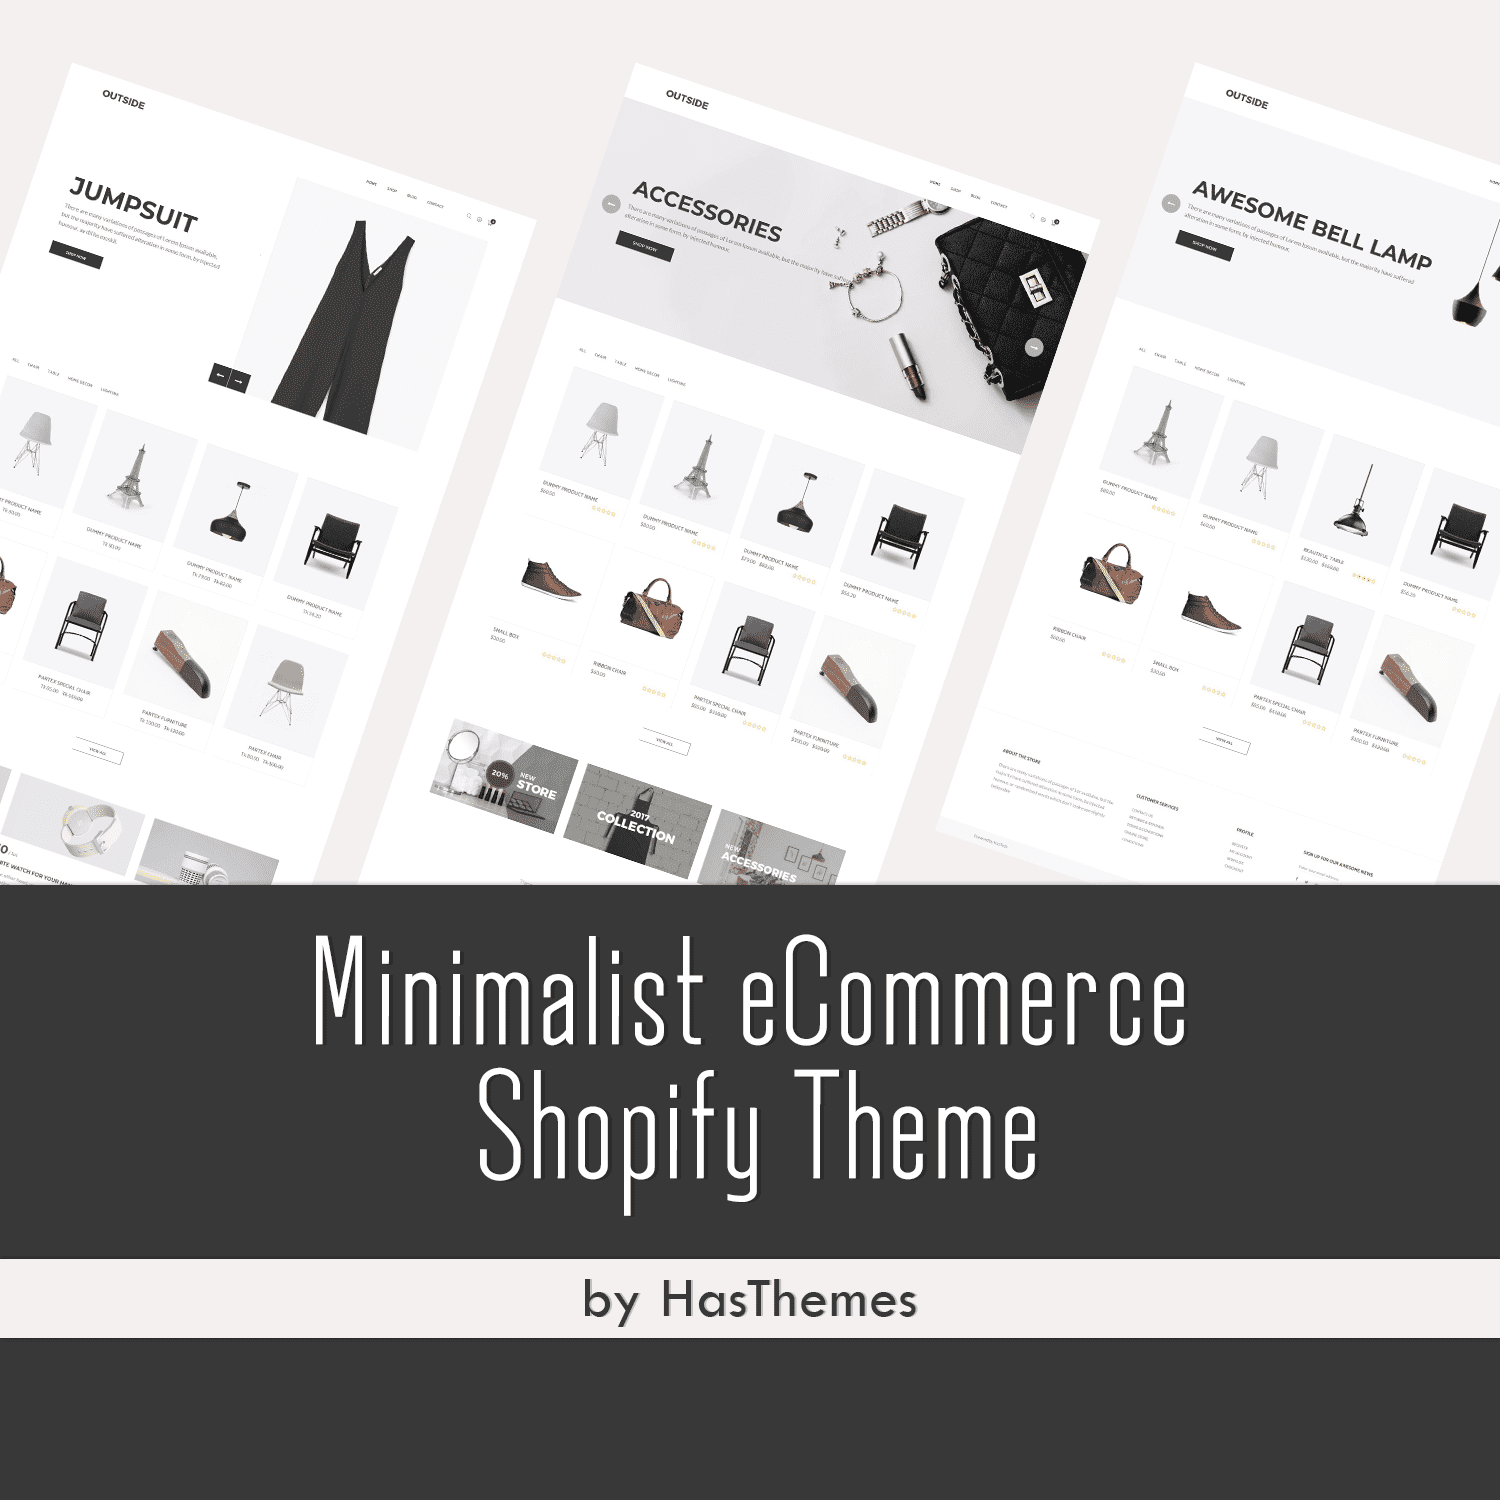 Minimalist ecommerce shopify theme, second picture 1500x1500.